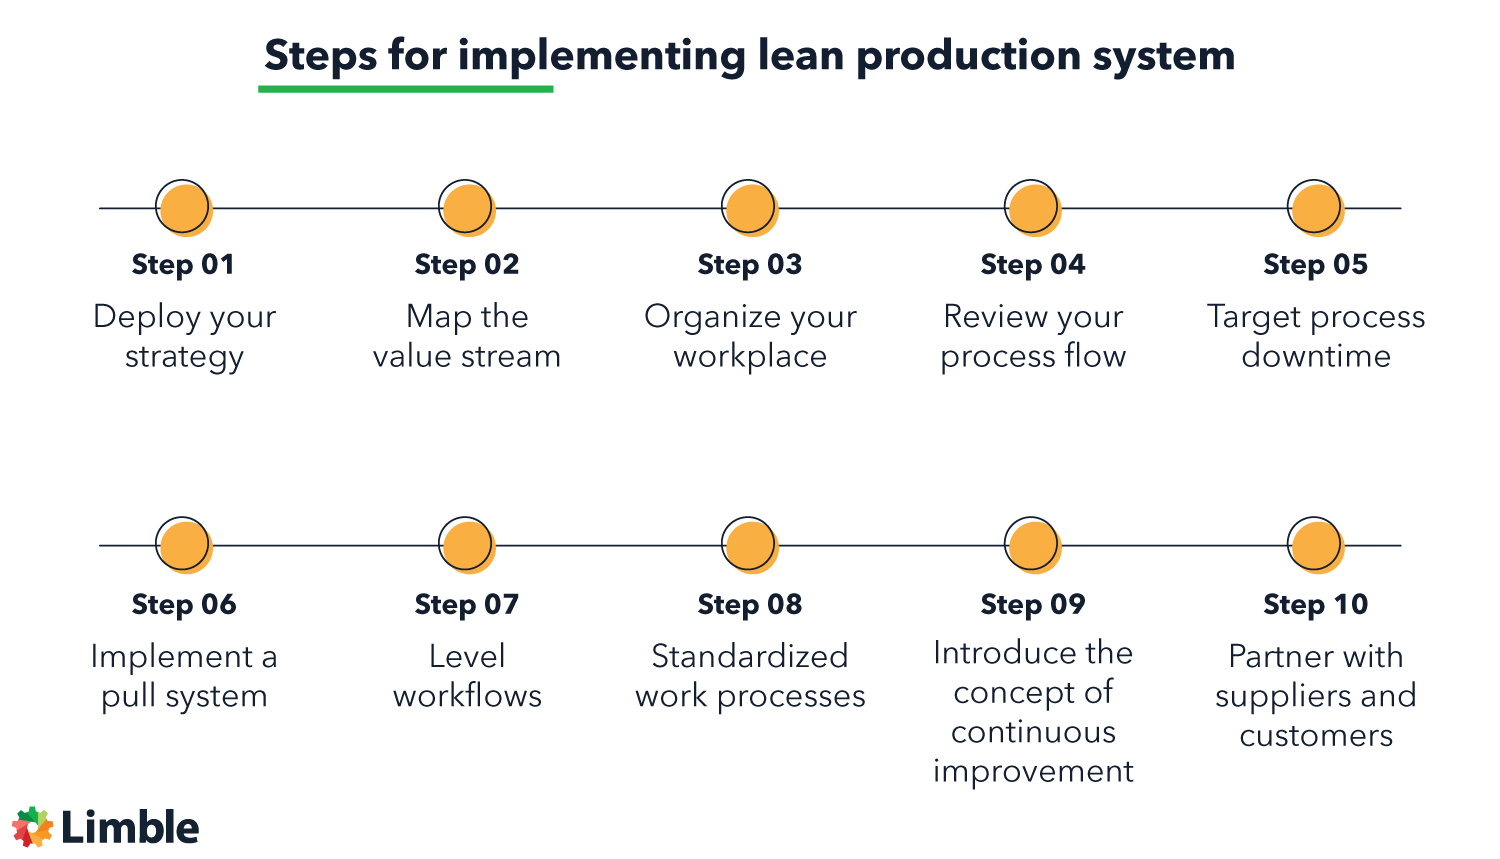 Steps for implementing lean production system